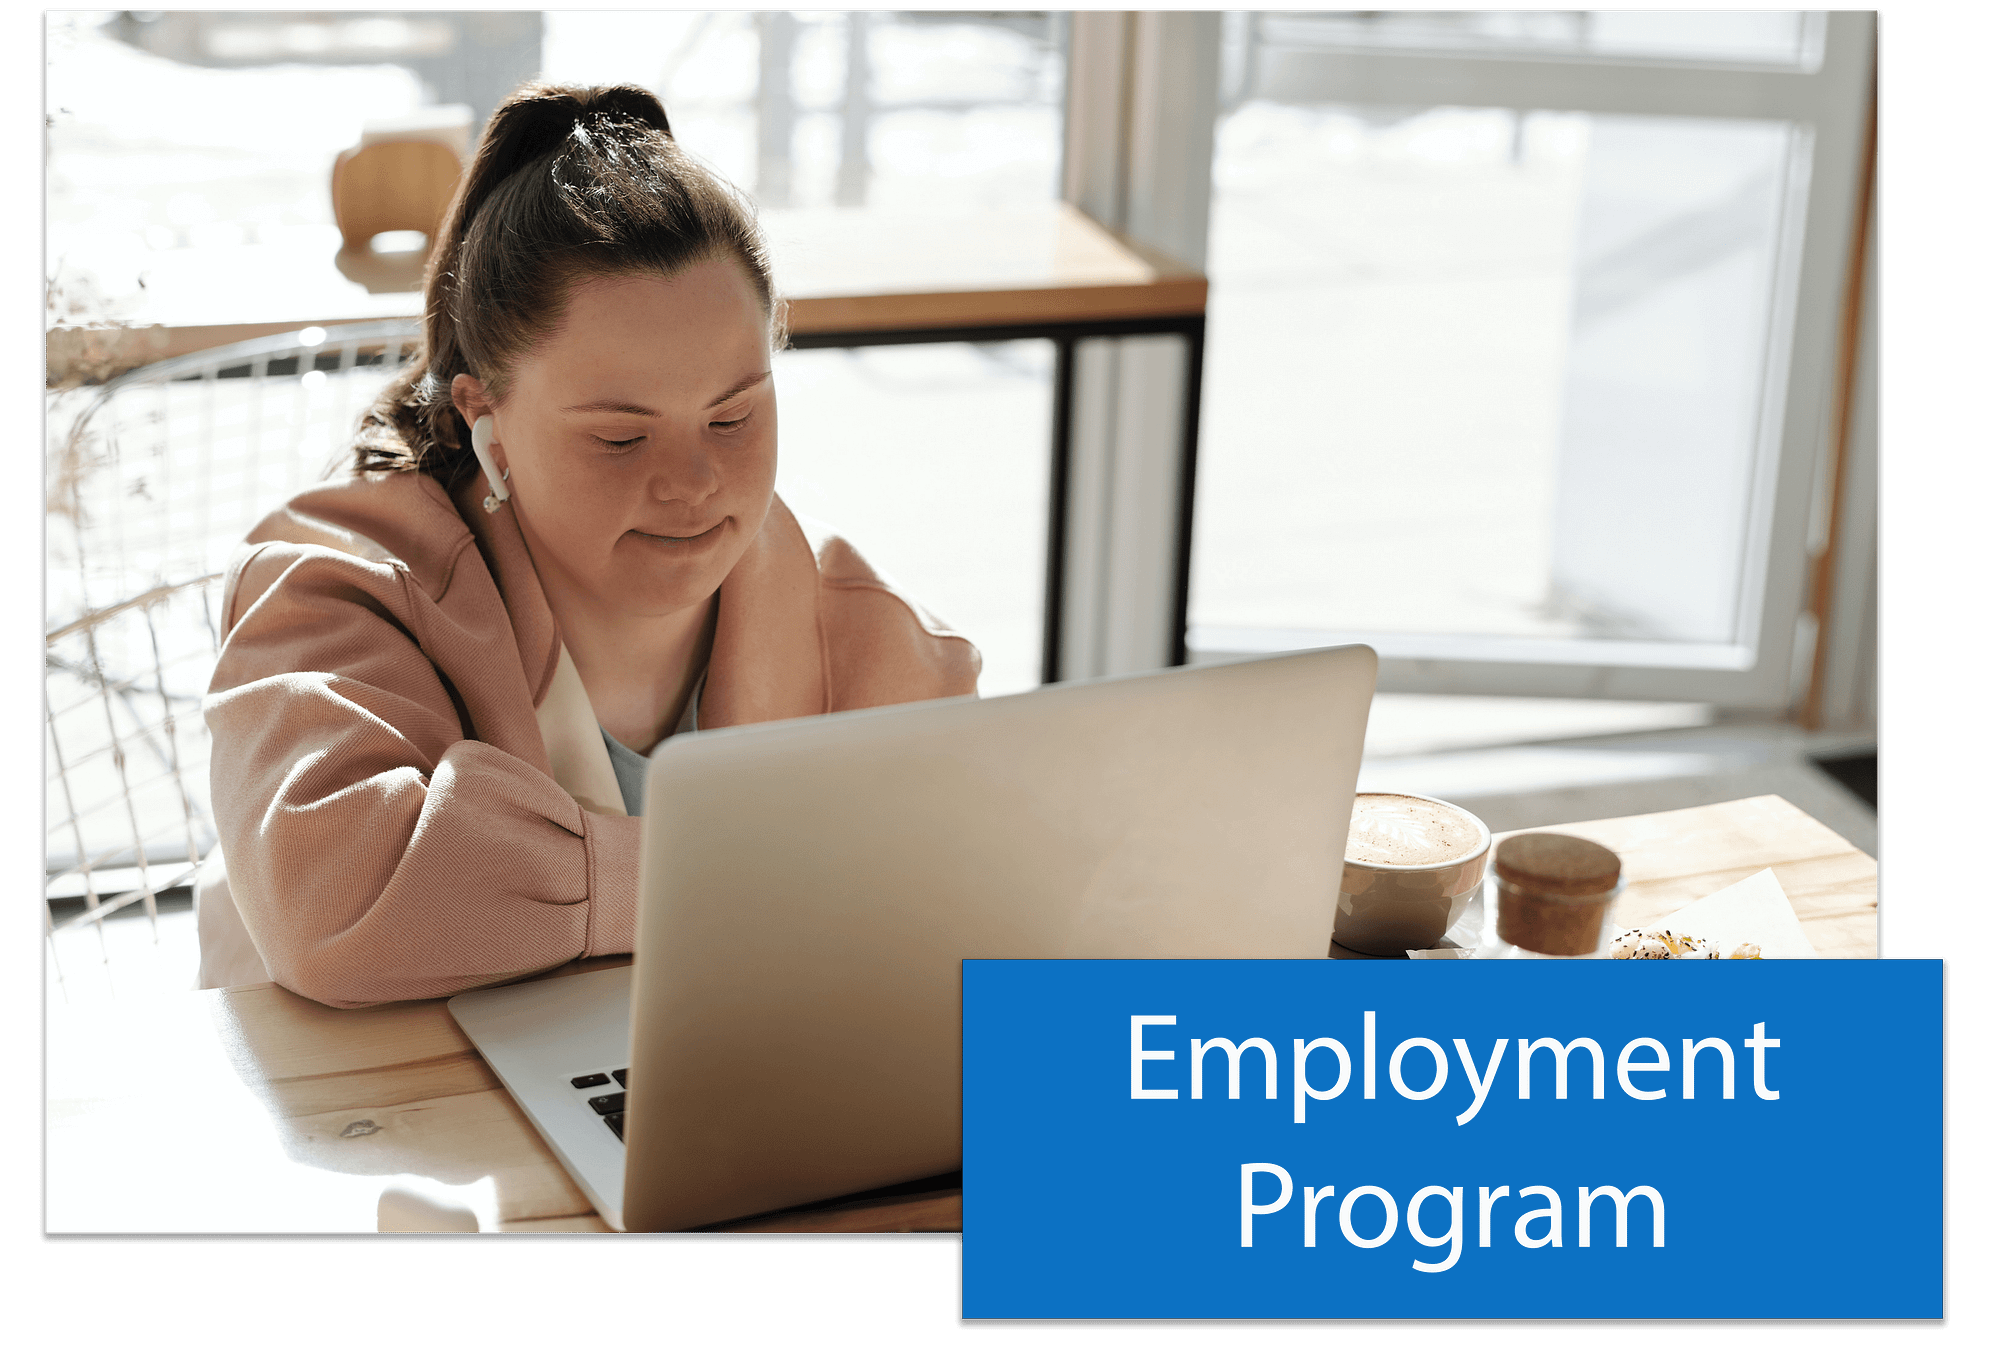 A button that says Employment Program placed in the lower right hand corner of an image of a woman with Downs Syndrome working on a laptop at a desk.